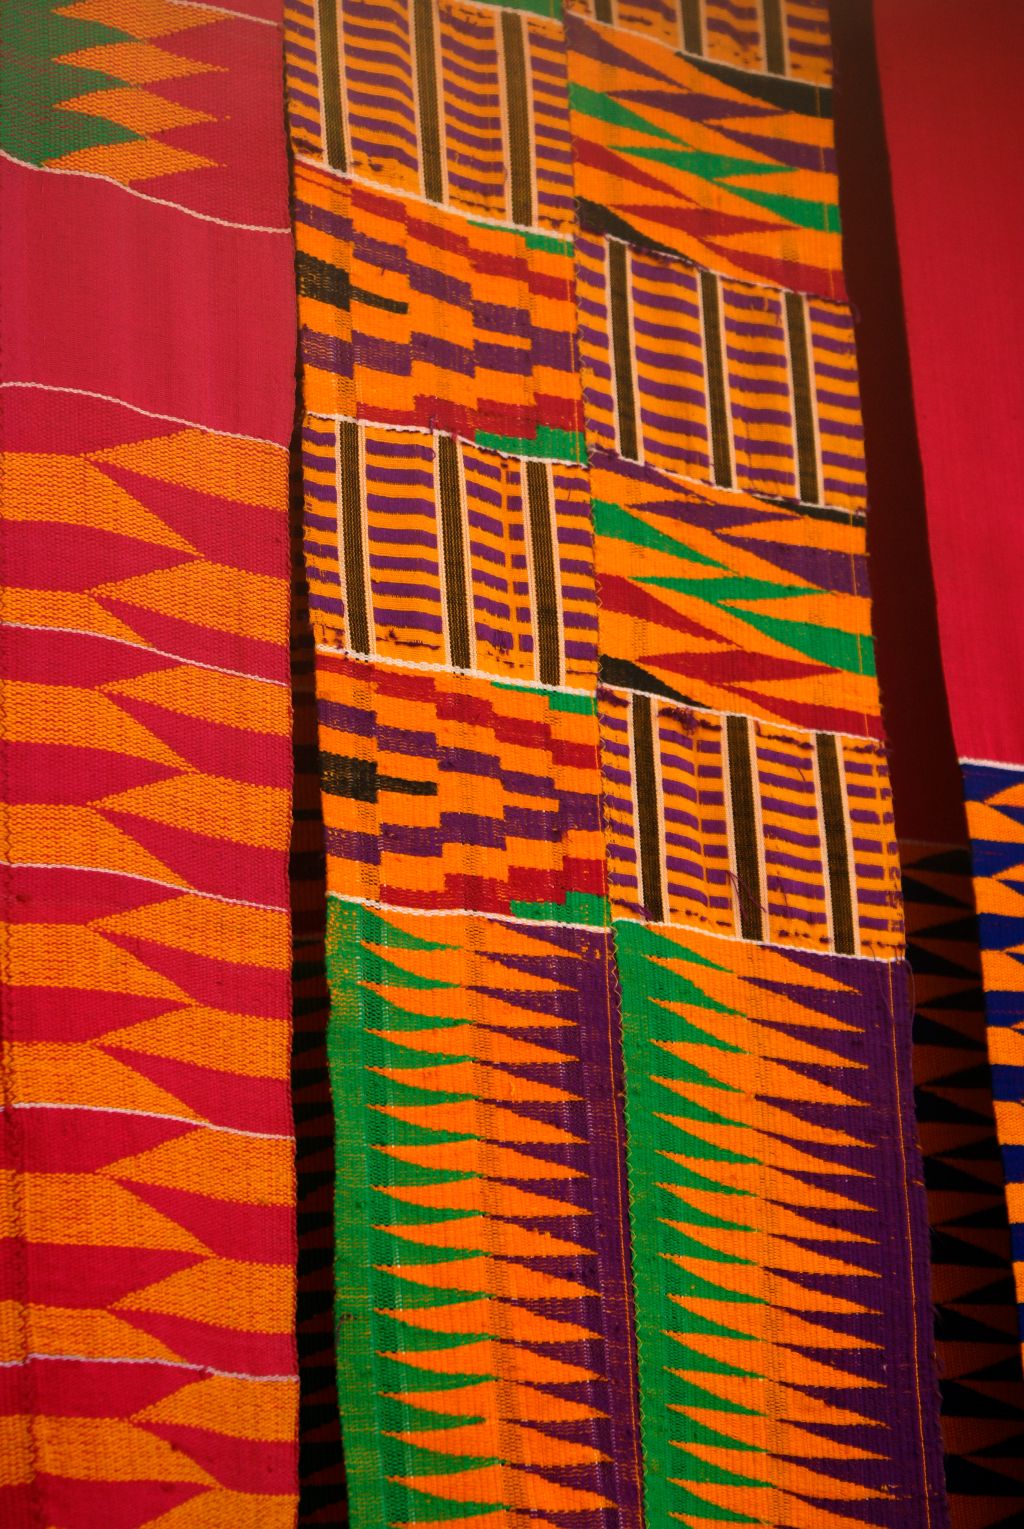 Colorful kente cloth produced in the weaving craft village of Adanwomase